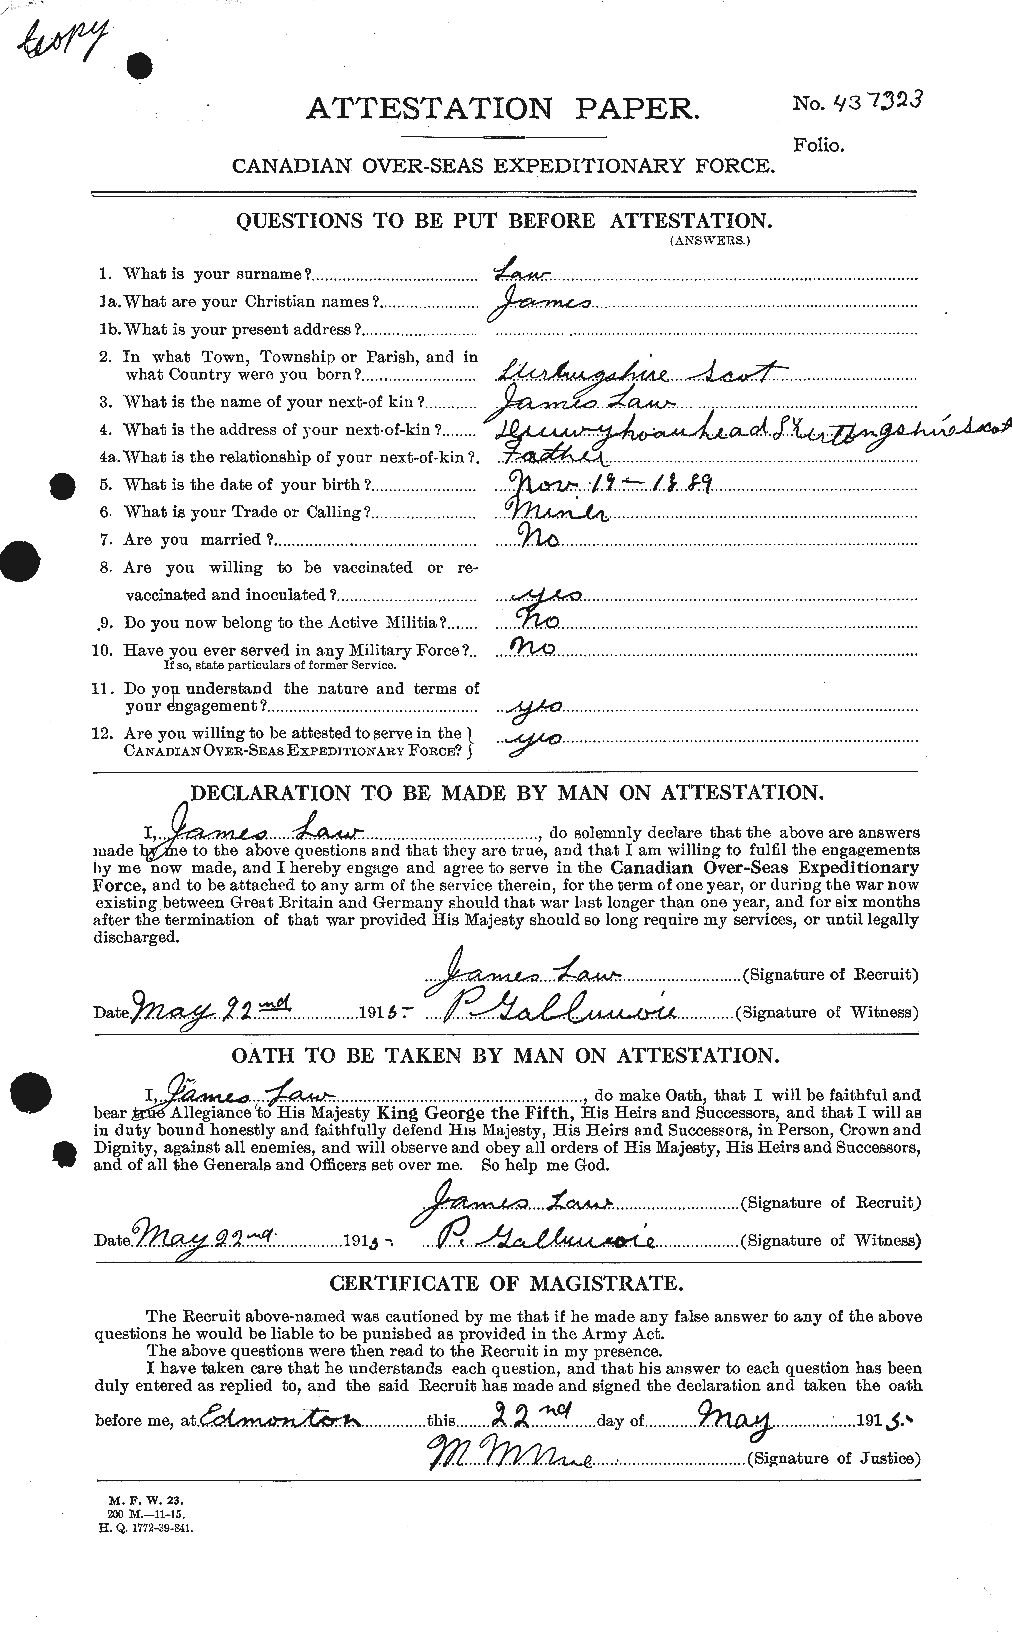 Personnel Records of the First World War - CEF 453960a